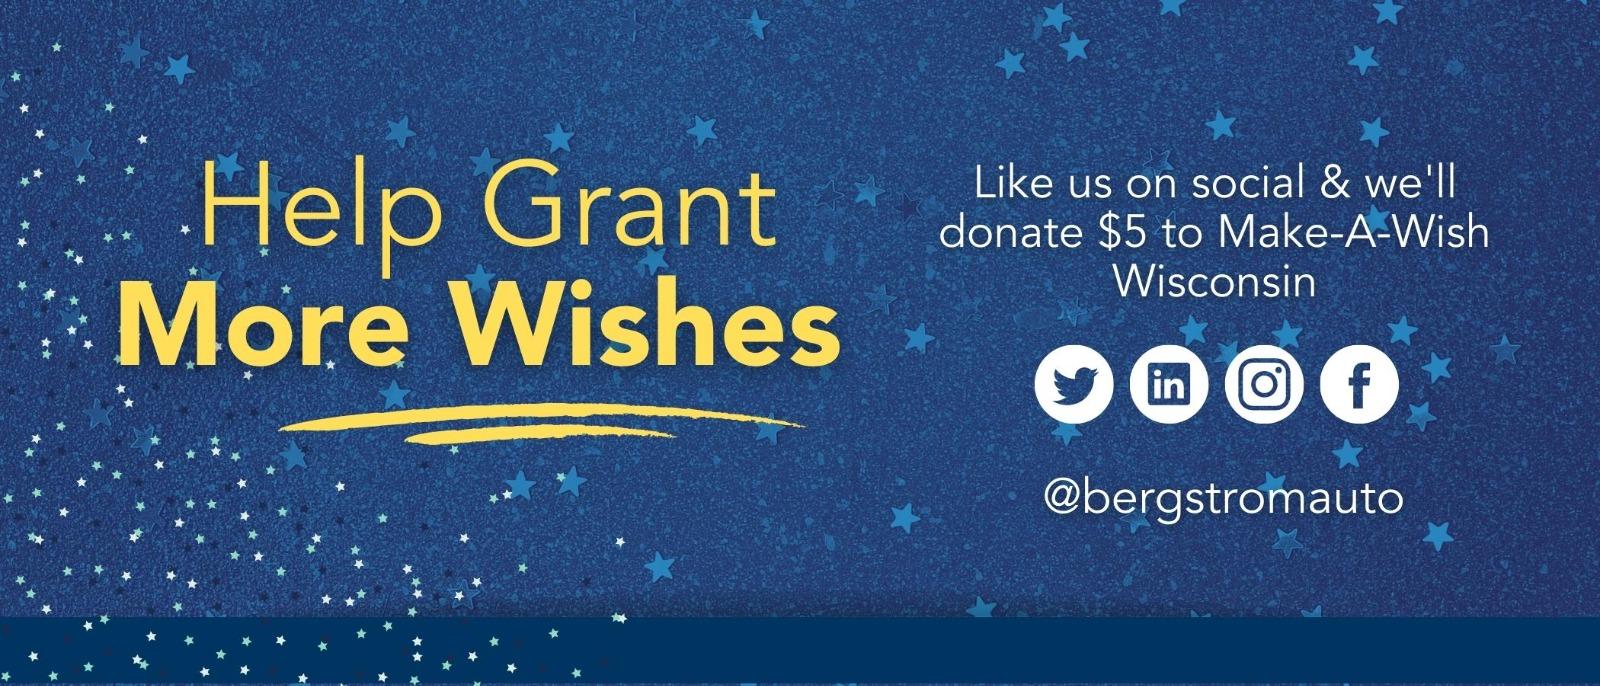 Like us on social & we'll donate $5 to Make-A-Wish Wisconsin